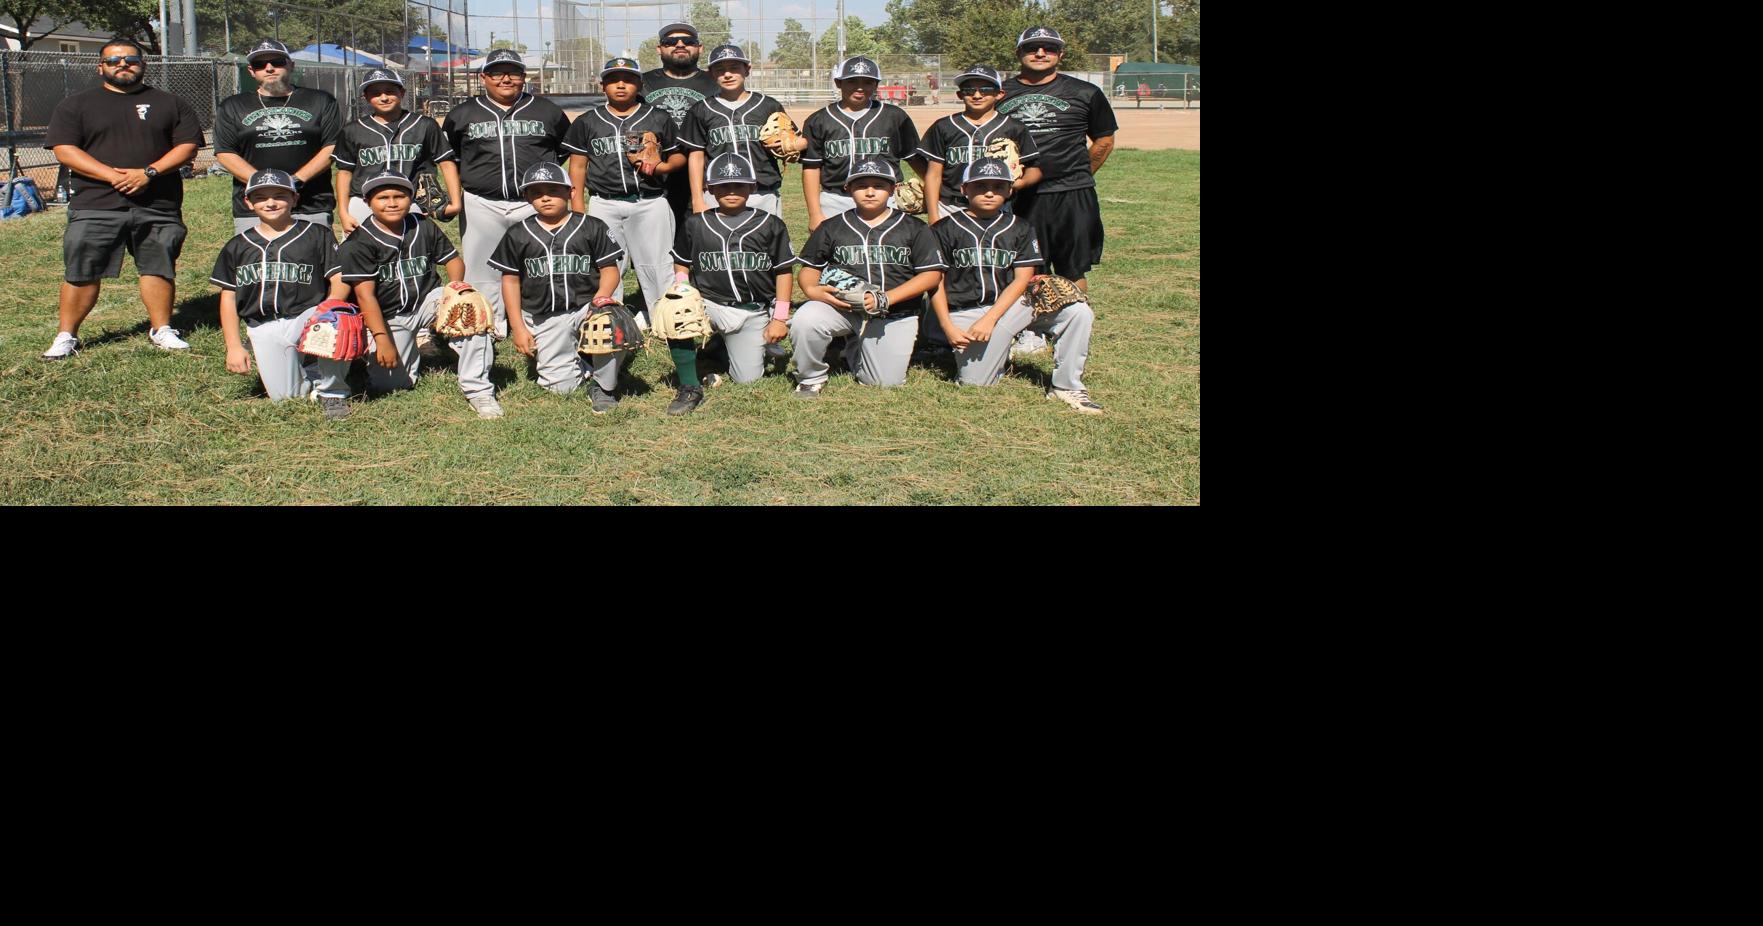 Elks Rockies take first place in Fontana's Tournament of Champions in Little  League, Sports